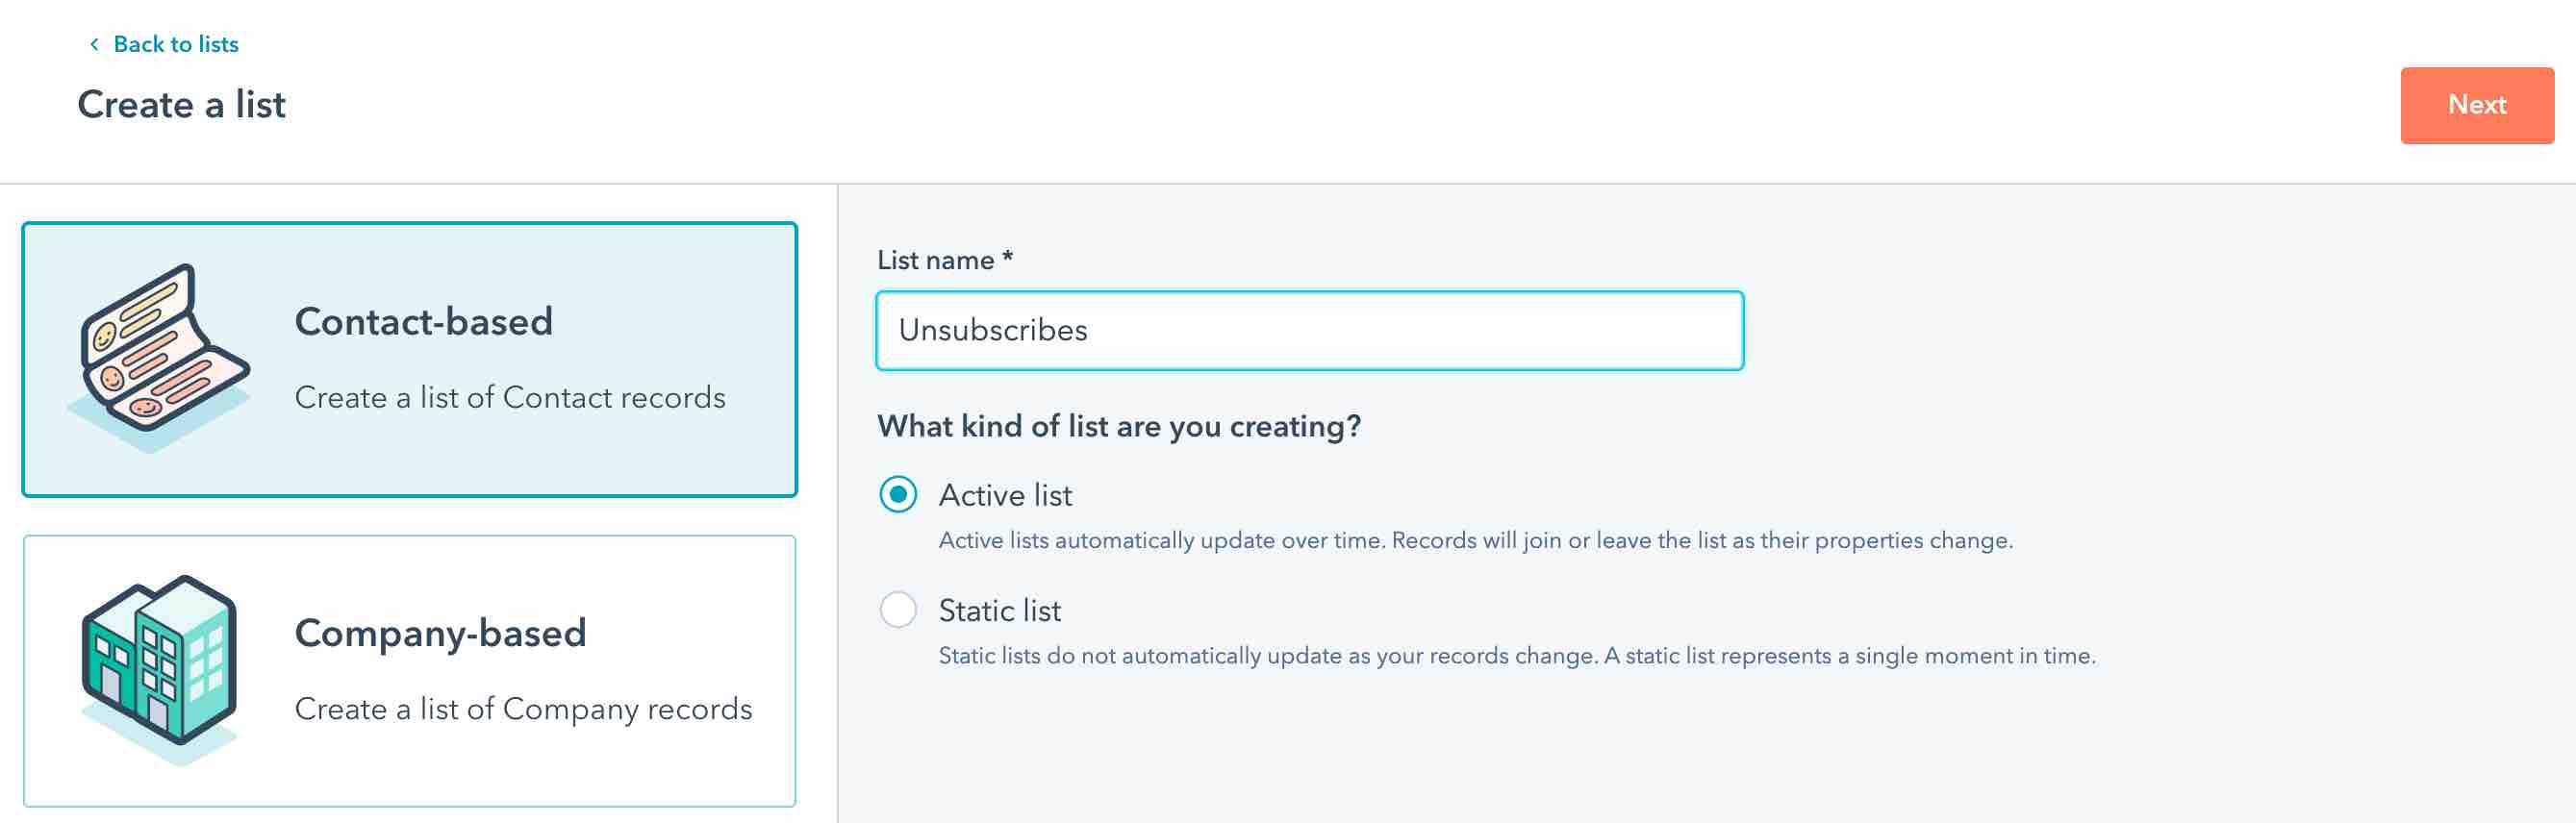 Create a list page in Hubspot with Contact-based list selected